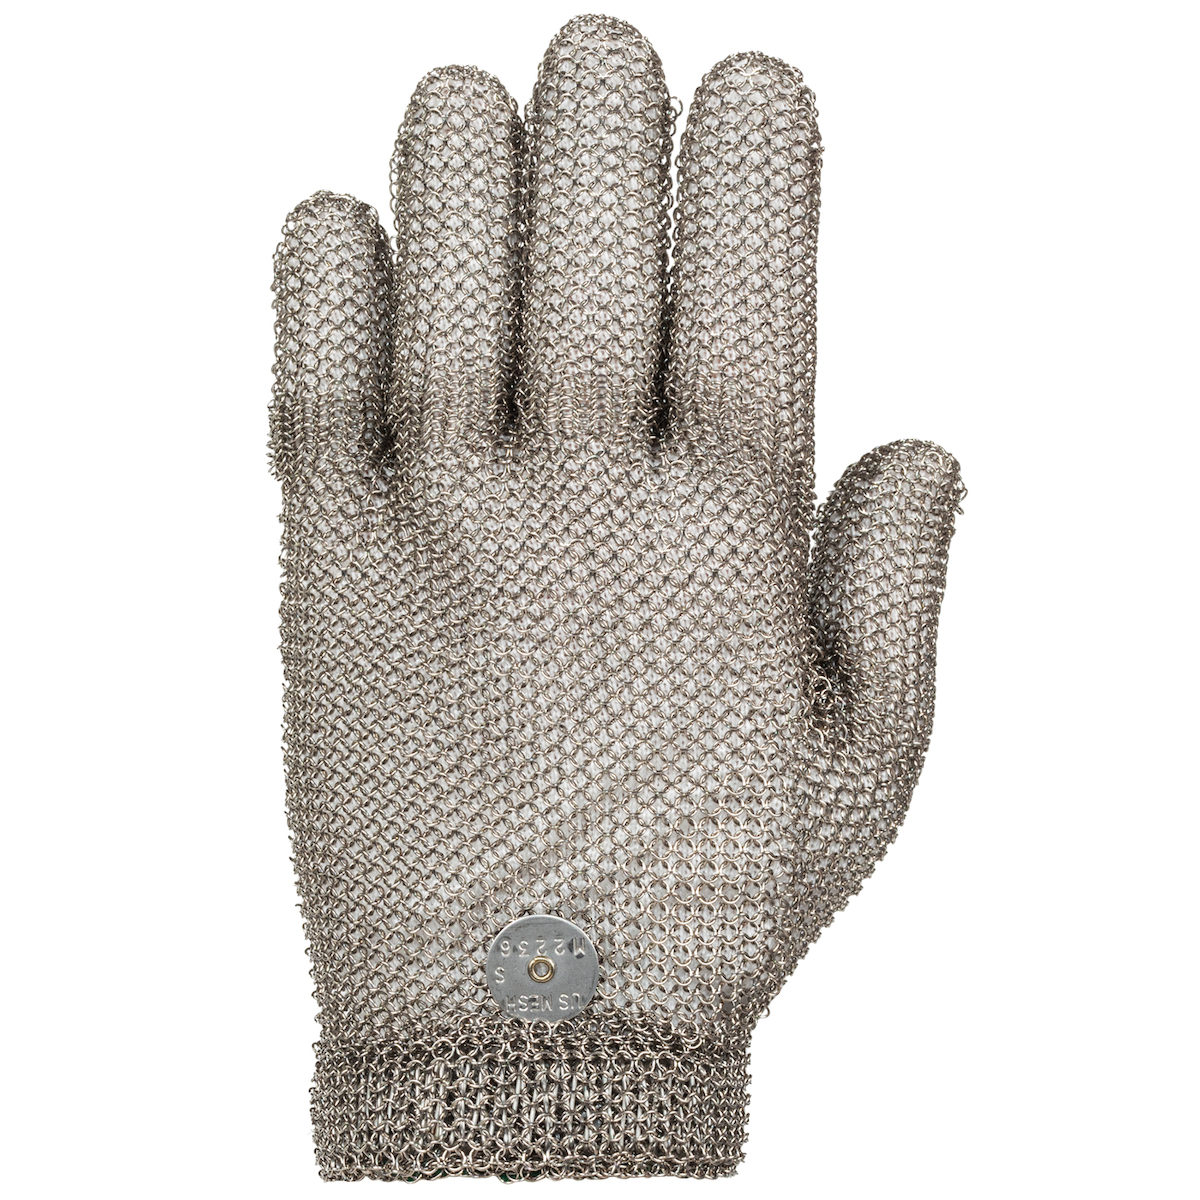 USM-1147 US Mesh® Stainless Steel Mesh Glove with Spring Closure - Wrist Length